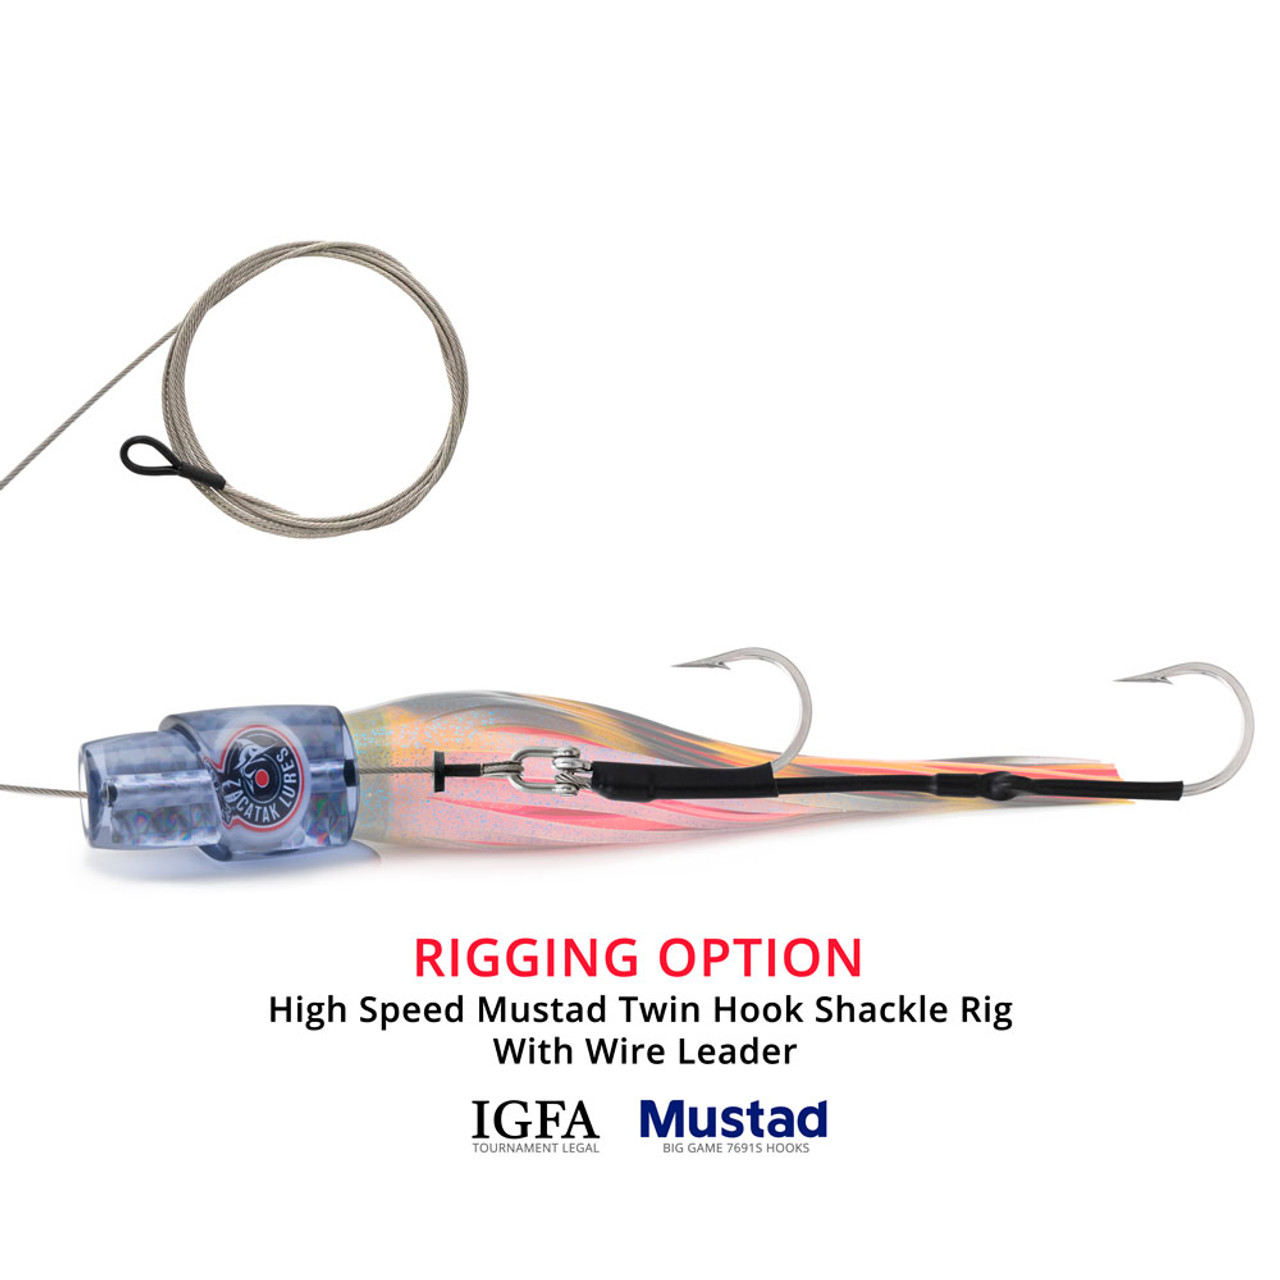 https://cdn11.bigcommerce.com/s-sv4r4mic/images/stencil/1280x1280/products/9245/50257/zacatak-lures-high-speed-rigging-option-twin-hook-shackle-rig-thunderstruck__11284.1671434081.jpg?c=2?imbypass=on